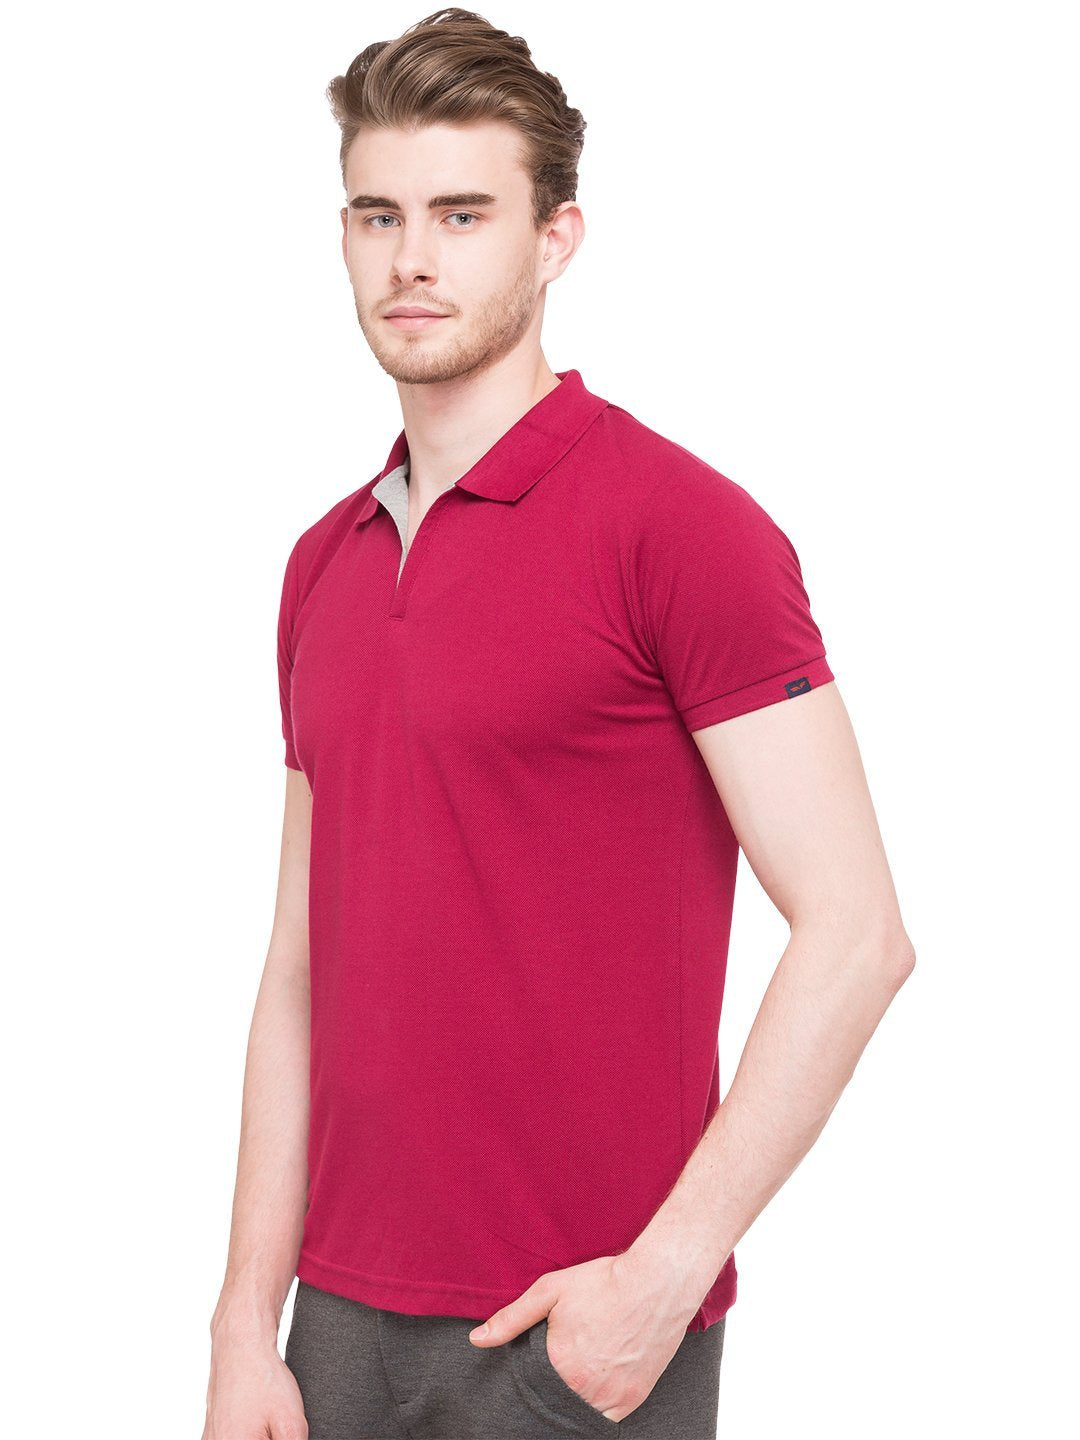 polo t shirt combo offer